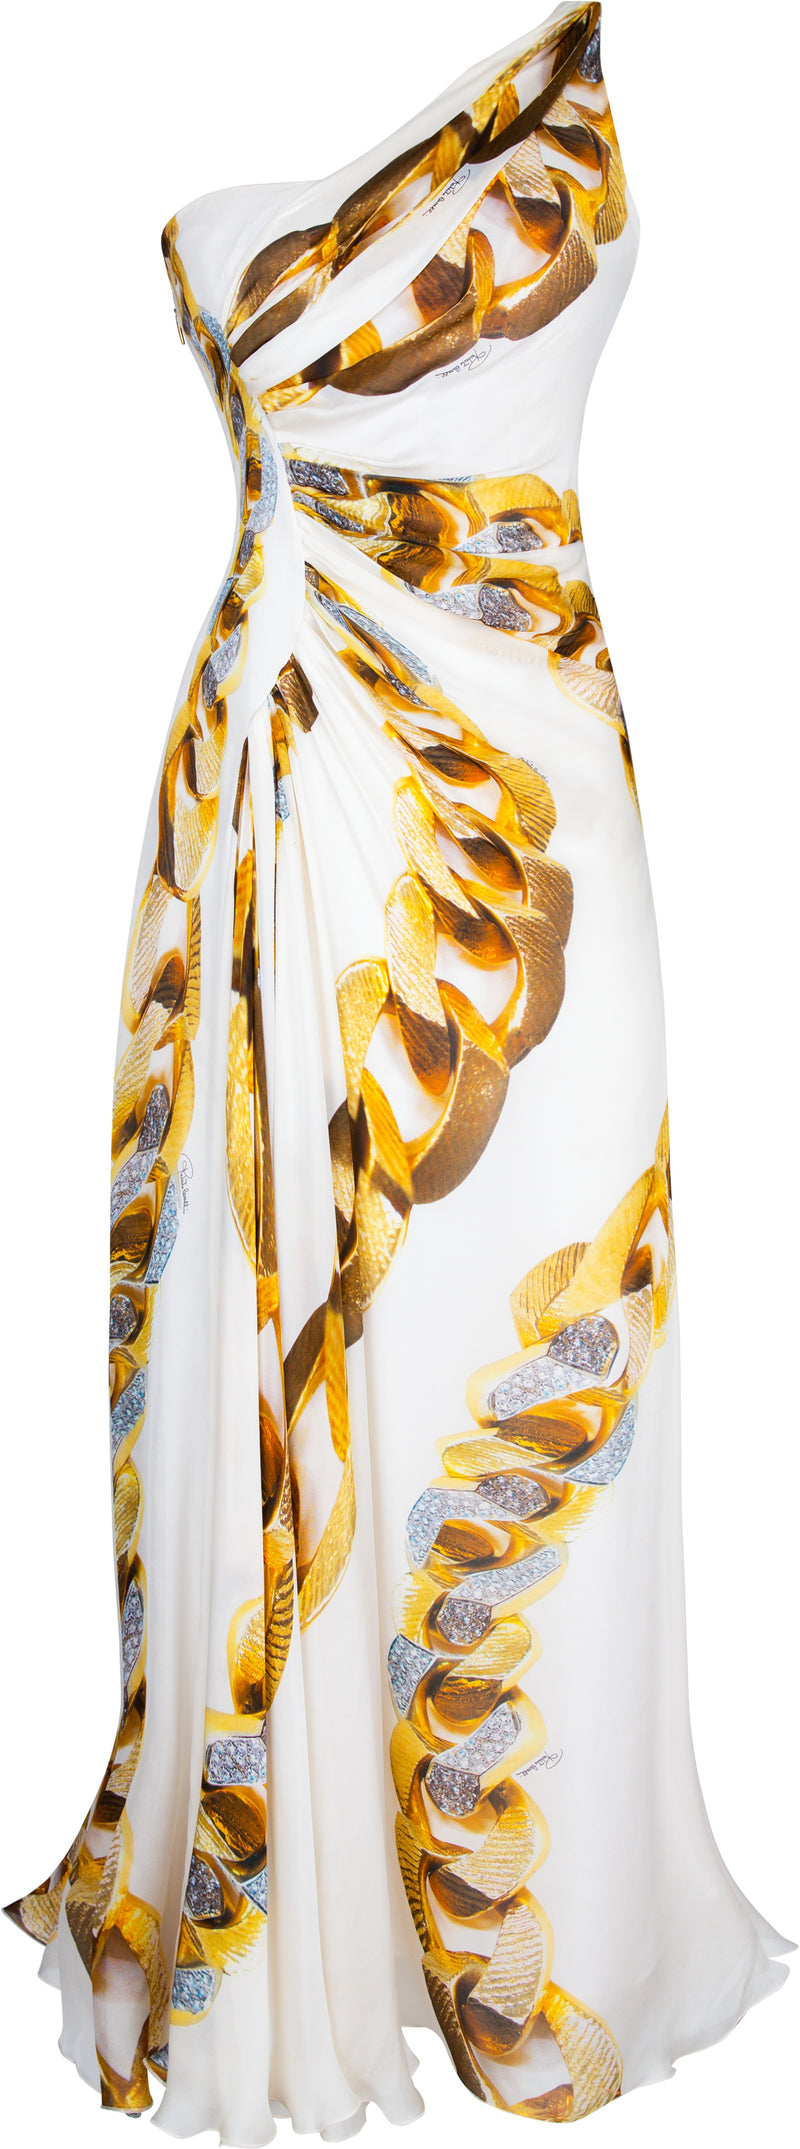 Roberto Cavalli Pre-Spring 2009 One-Shoulder Chain Printed Gown